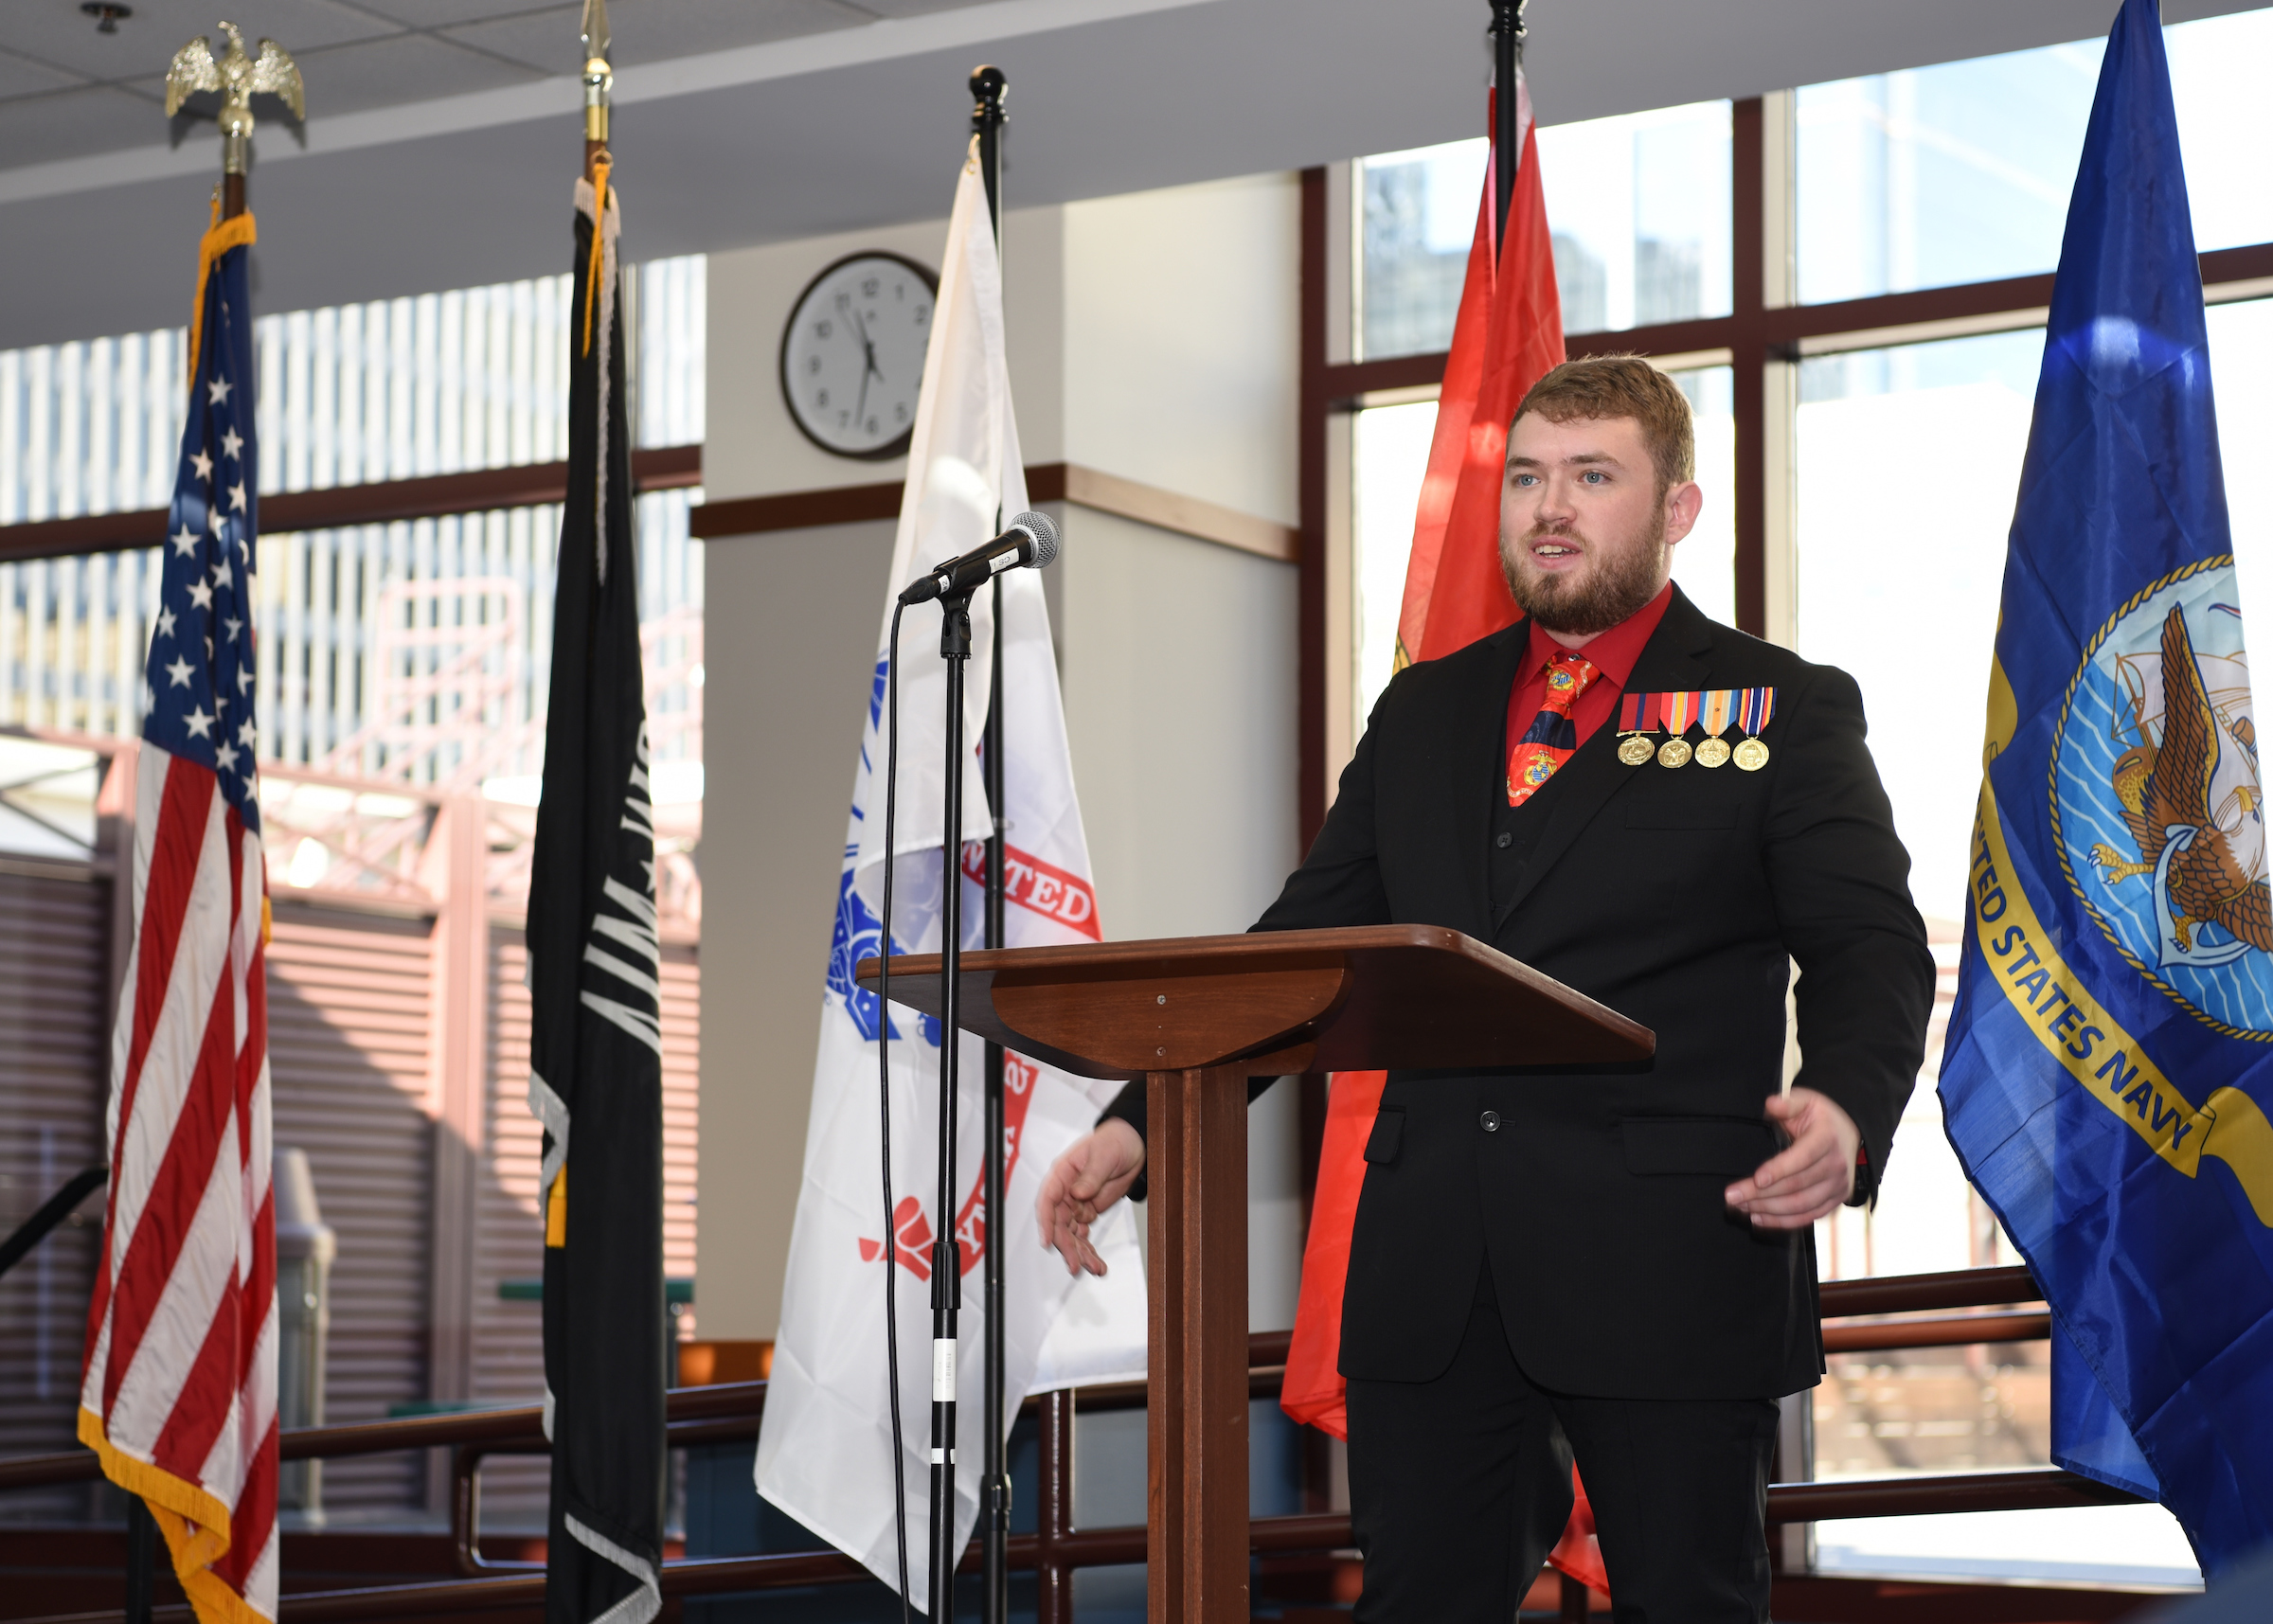 DePaul student Brandon Carroll, who has earned four medals while serving in the Marine Corps, is a computer science major with a concentration in game systems. (Photo by Kathy Hillegonds / DePaul University)